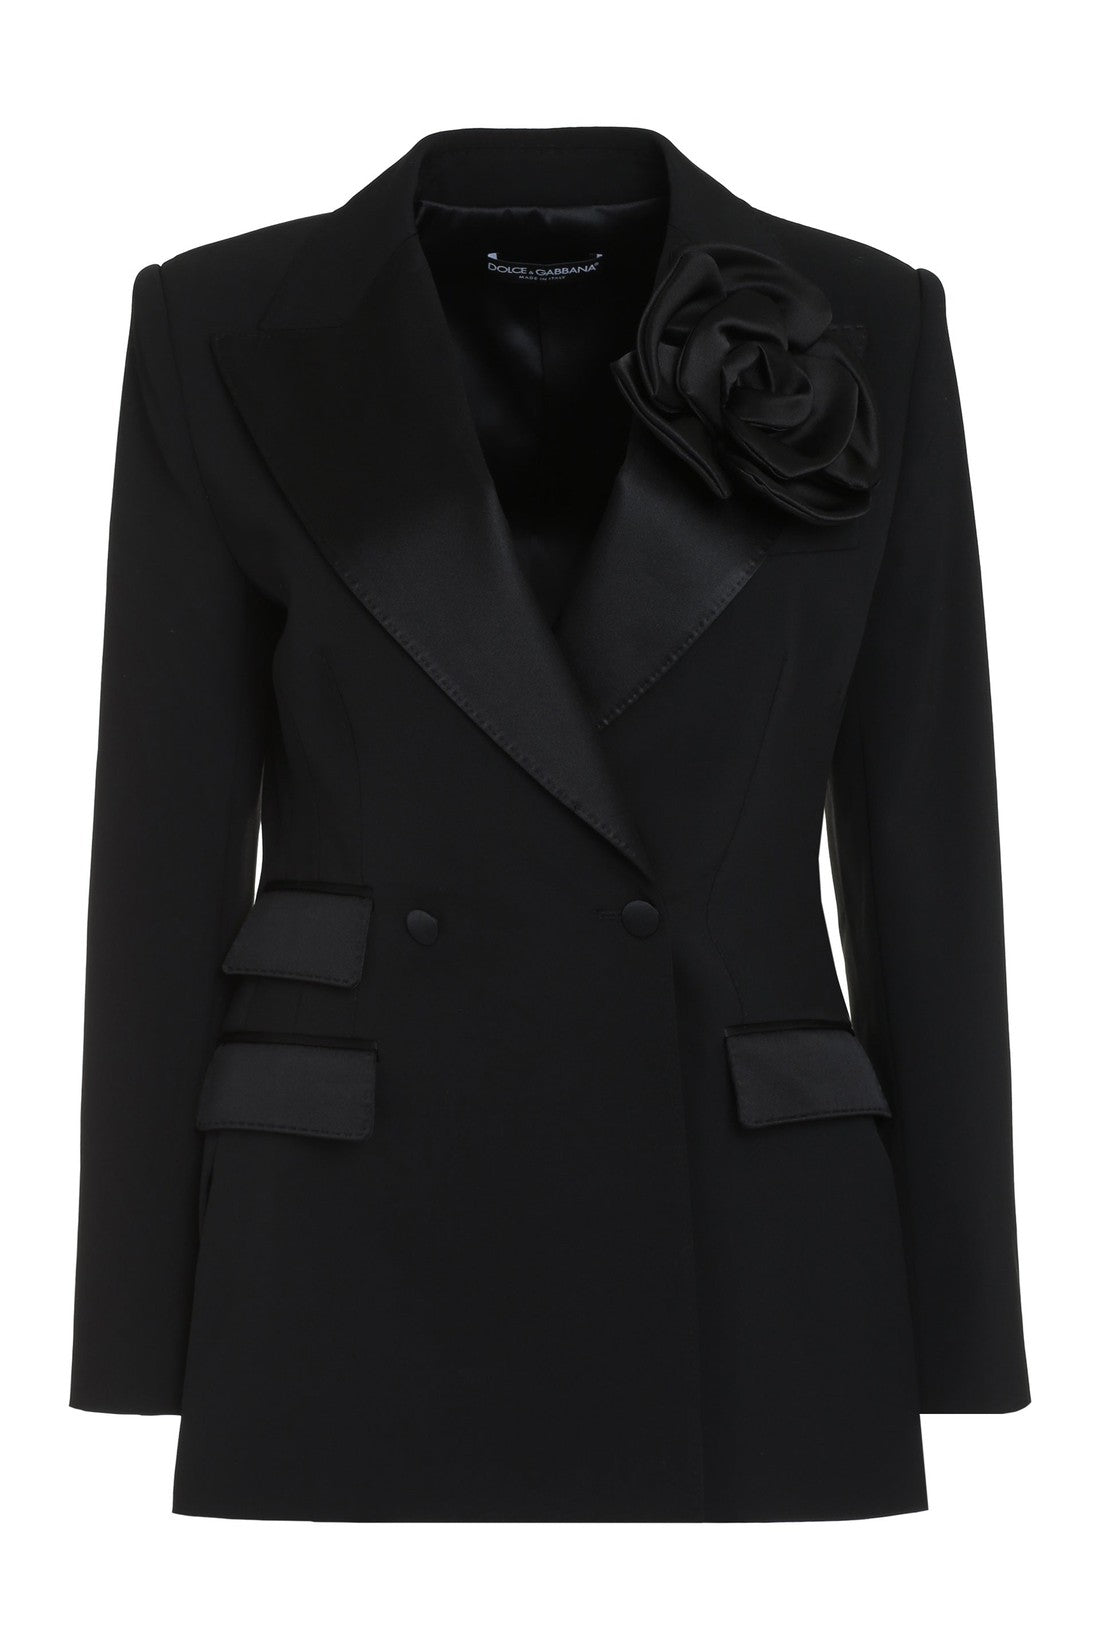 Dolce & Gabbana-OUTLET-SALE-Double-breasted virgin wool jacket-ARCHIVIST